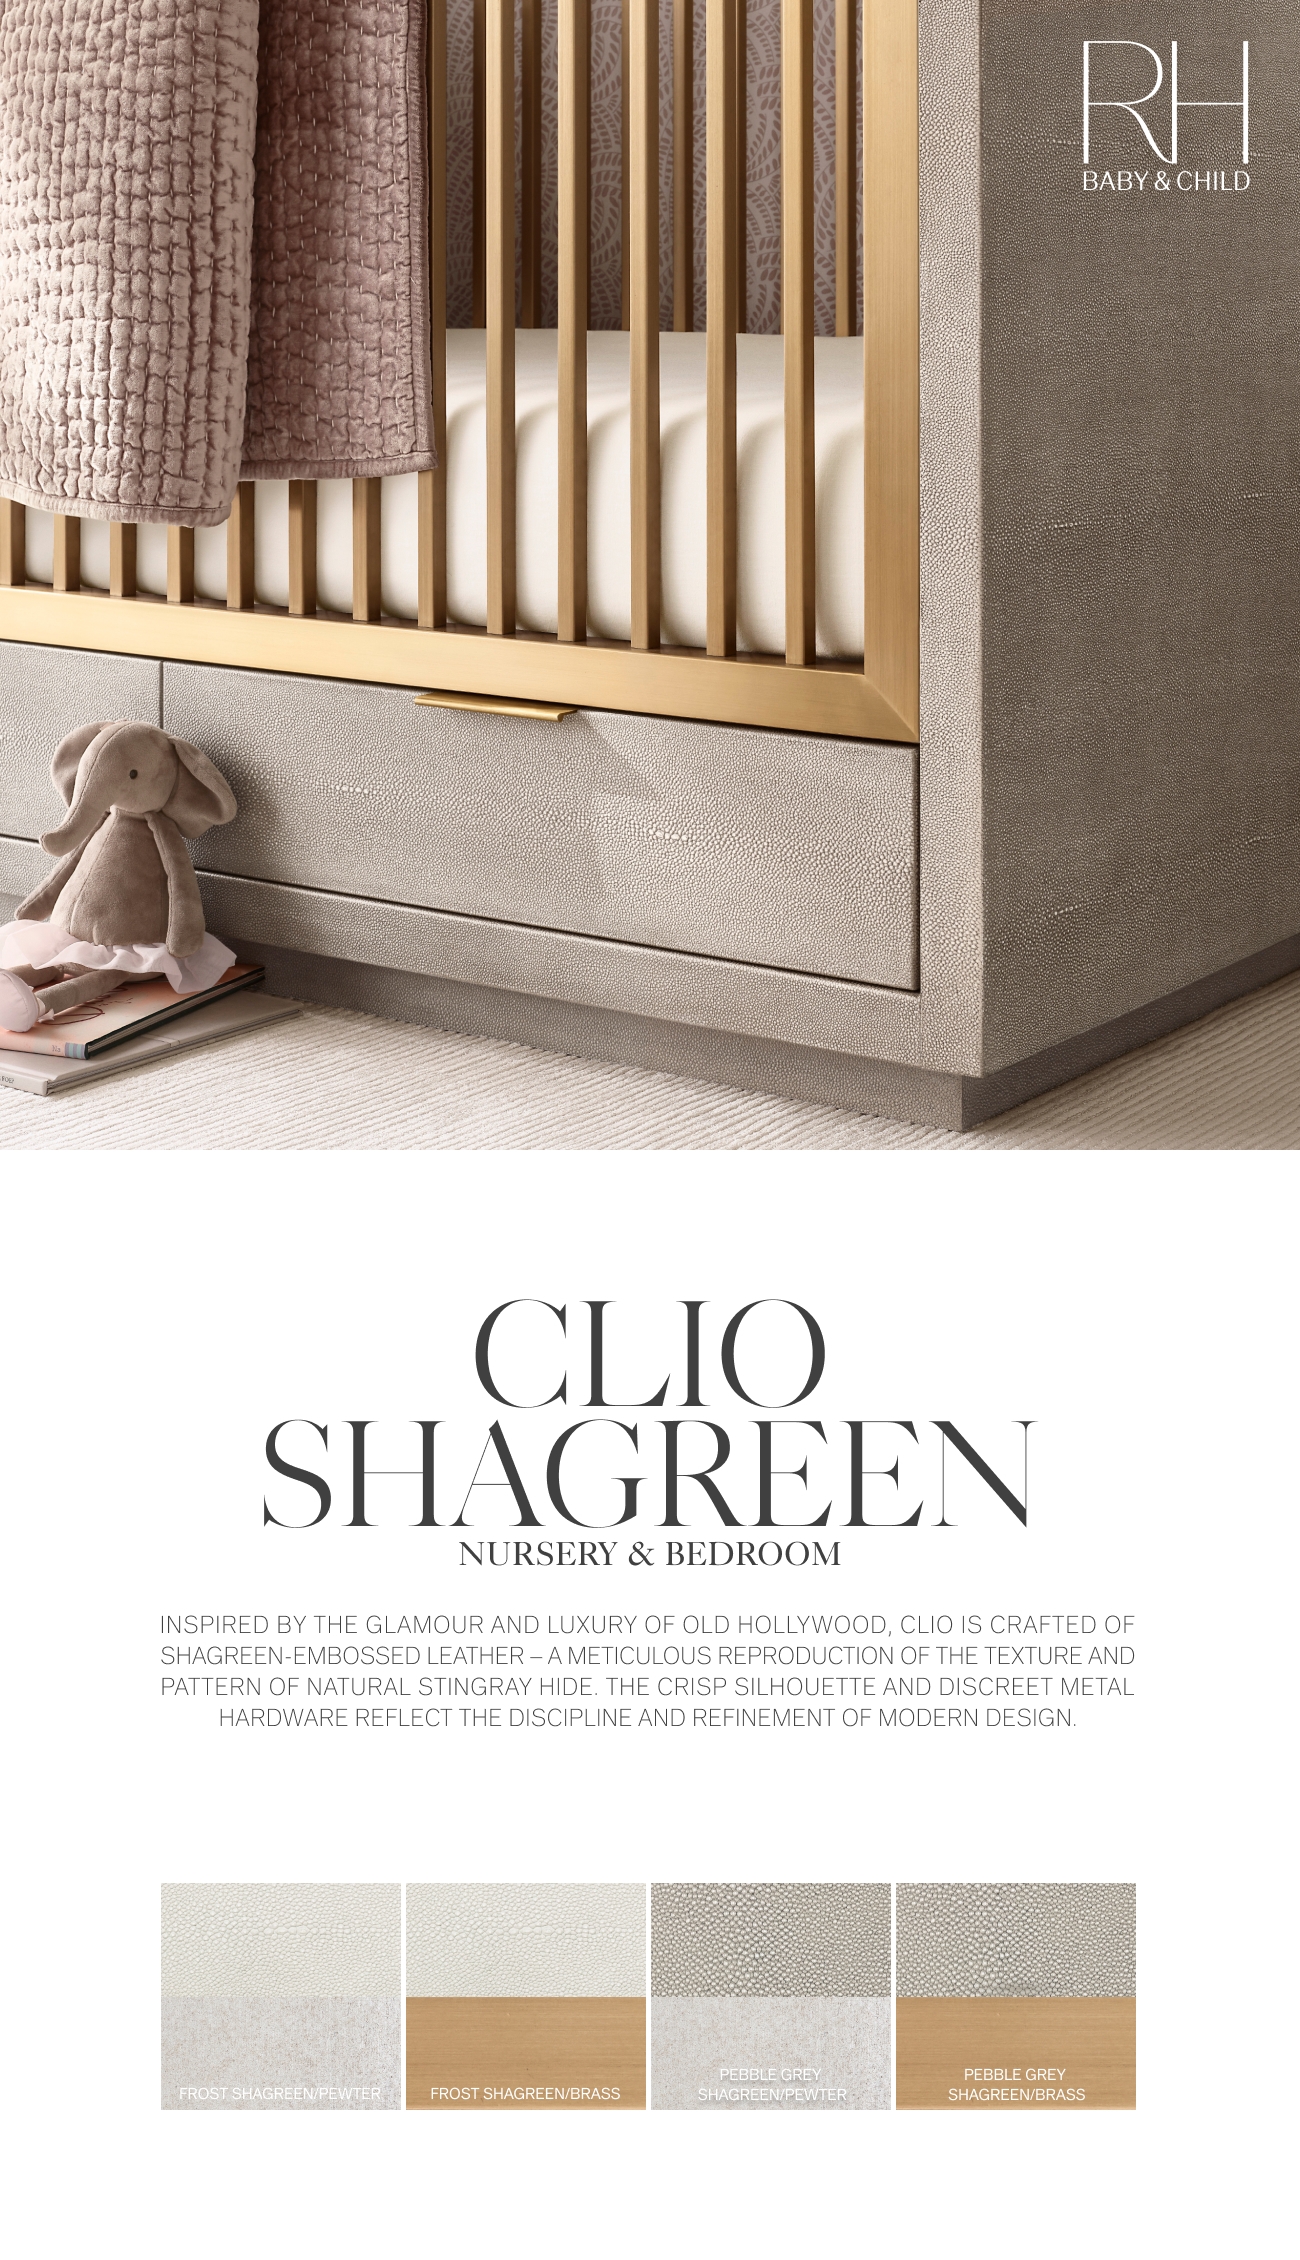 The Clio Shagreen Collection. Rich Embossed Leather for the Nursery ...